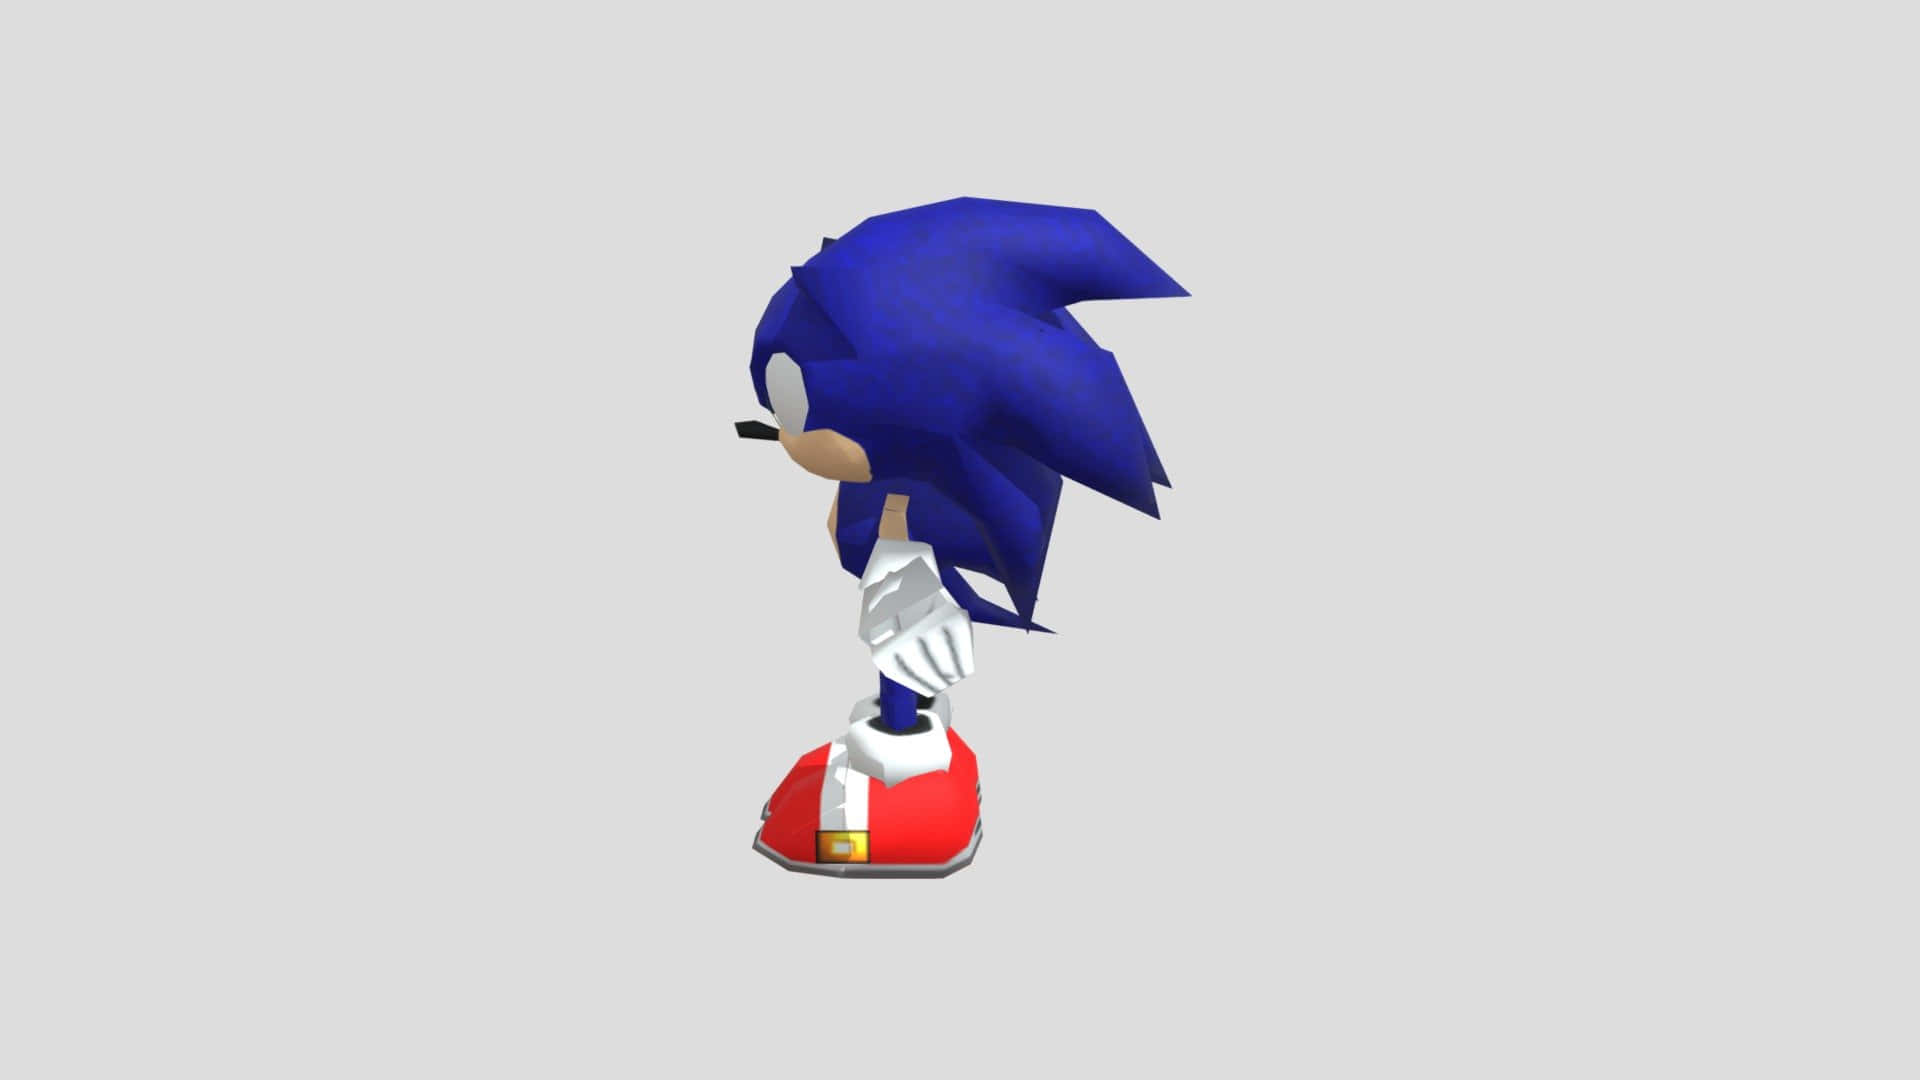 Sonic The Hedgehog preparing for a race.